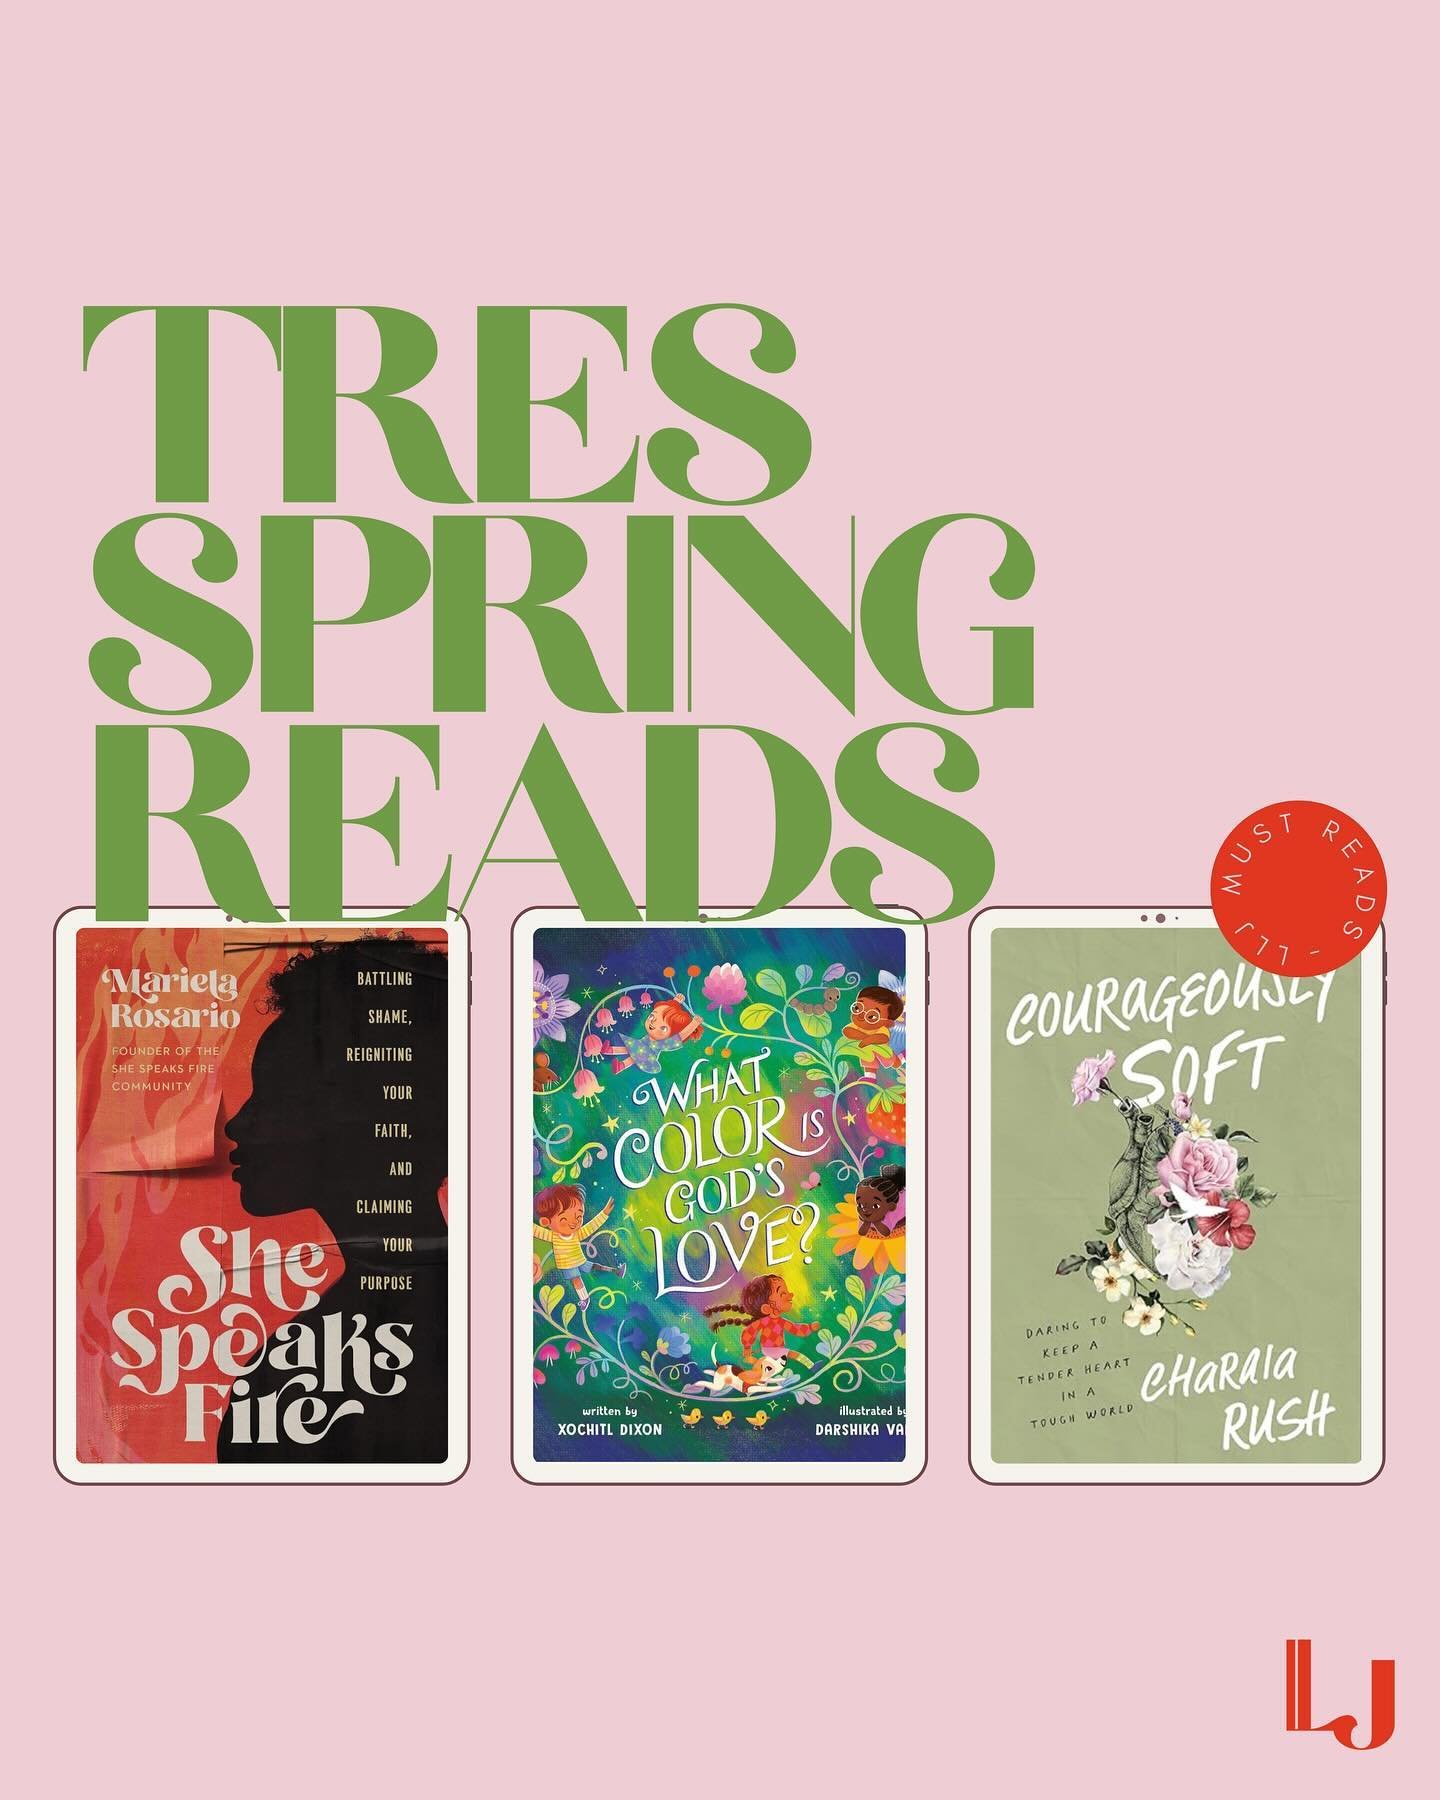 One thing we will always do around here is recommend a good libro to our amigas!📚

Swipe for 3 spring reads that we&rsquo;ve been loving and hope you will too. Whether it&rsquo;s with your kids, in community or on your own, we hope you make space to